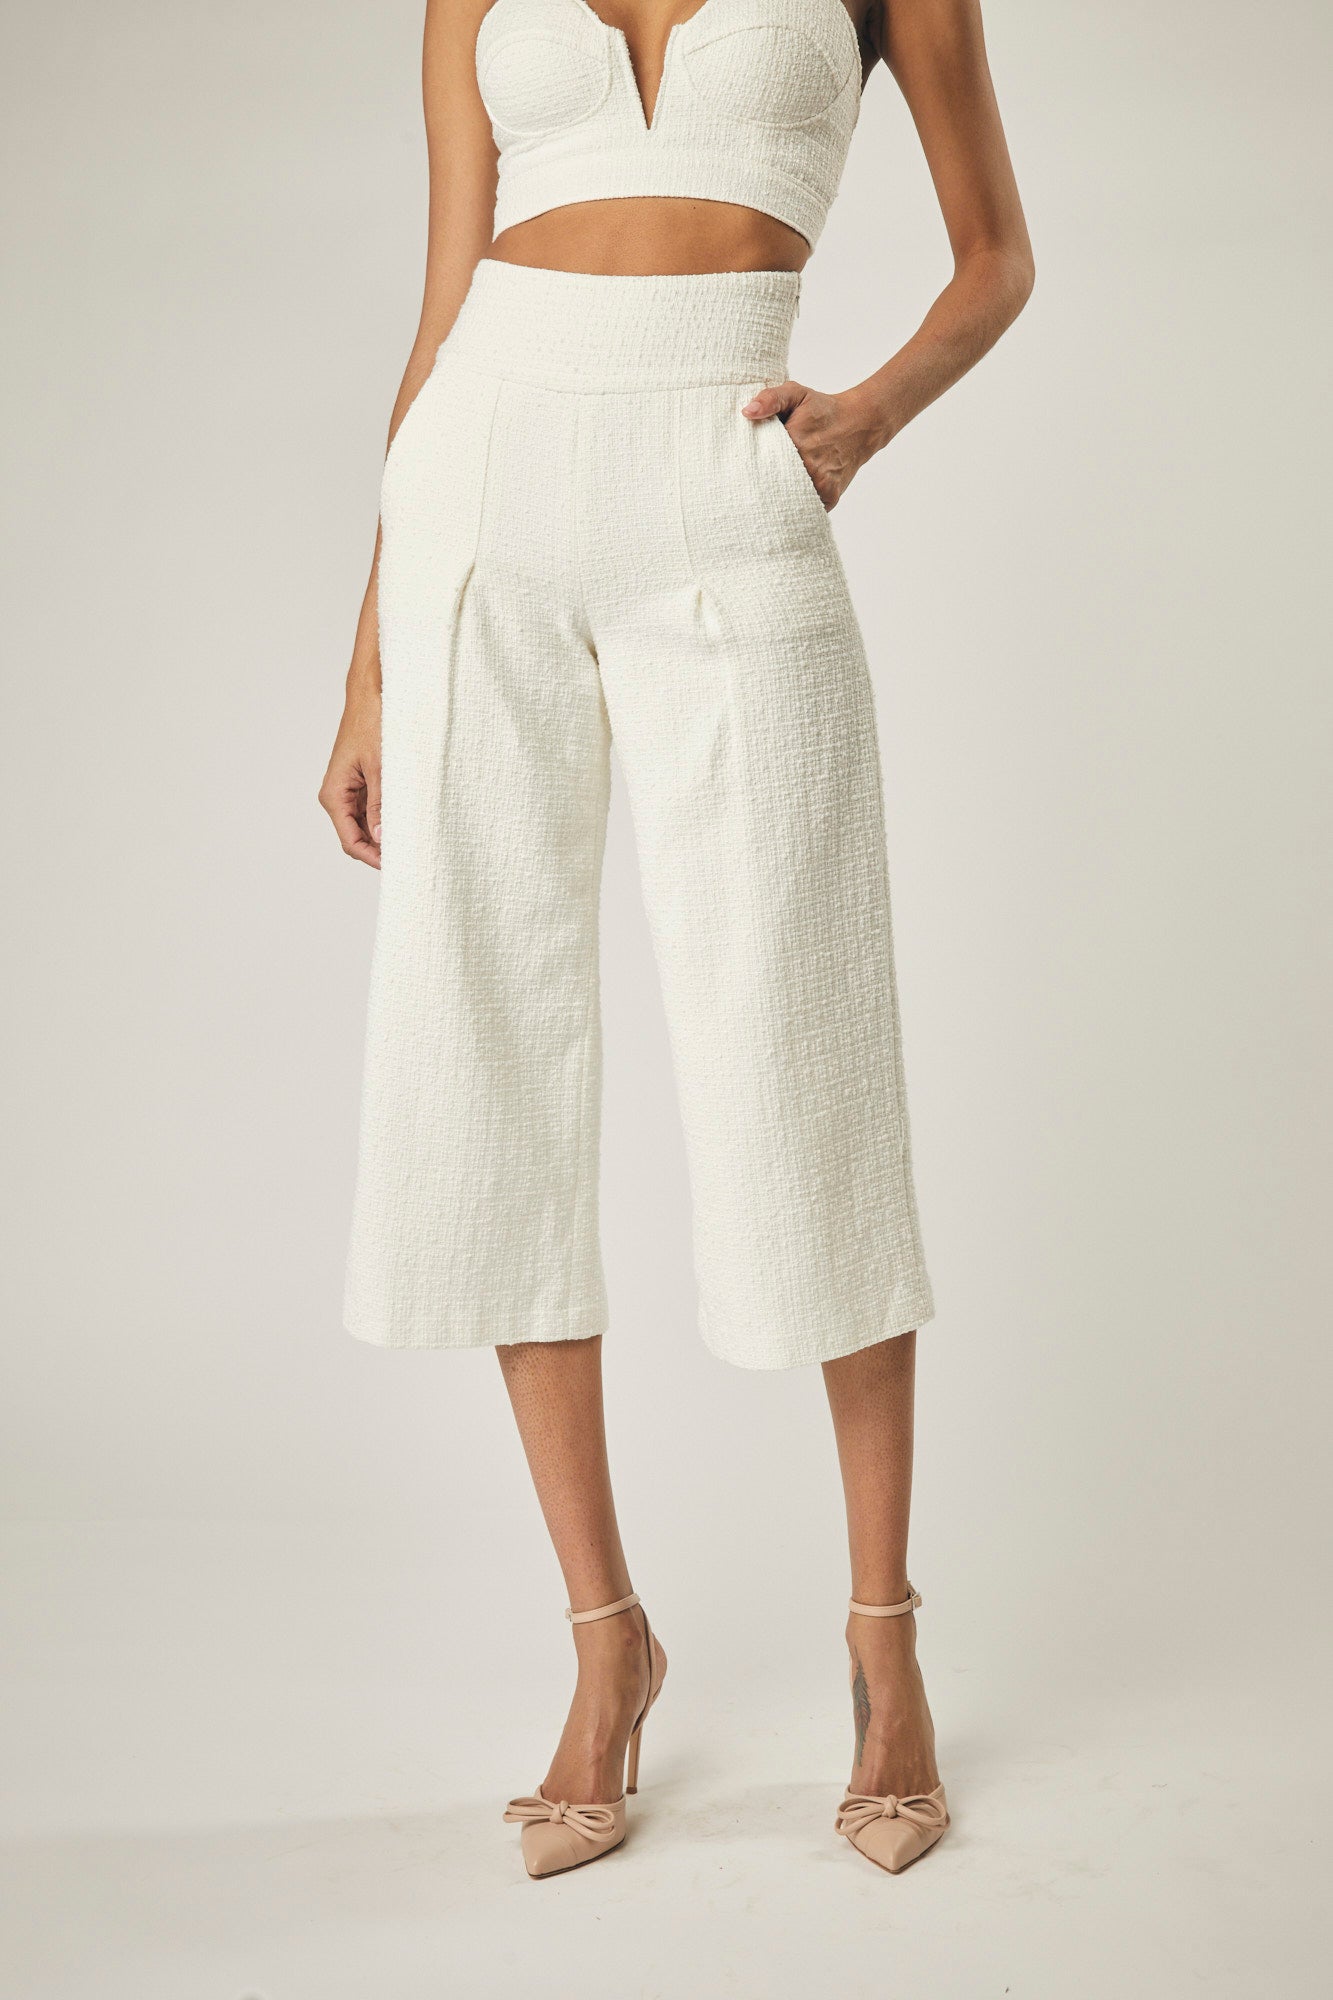 Jacqueline Cotton Tweed Pants In White by Ladaire